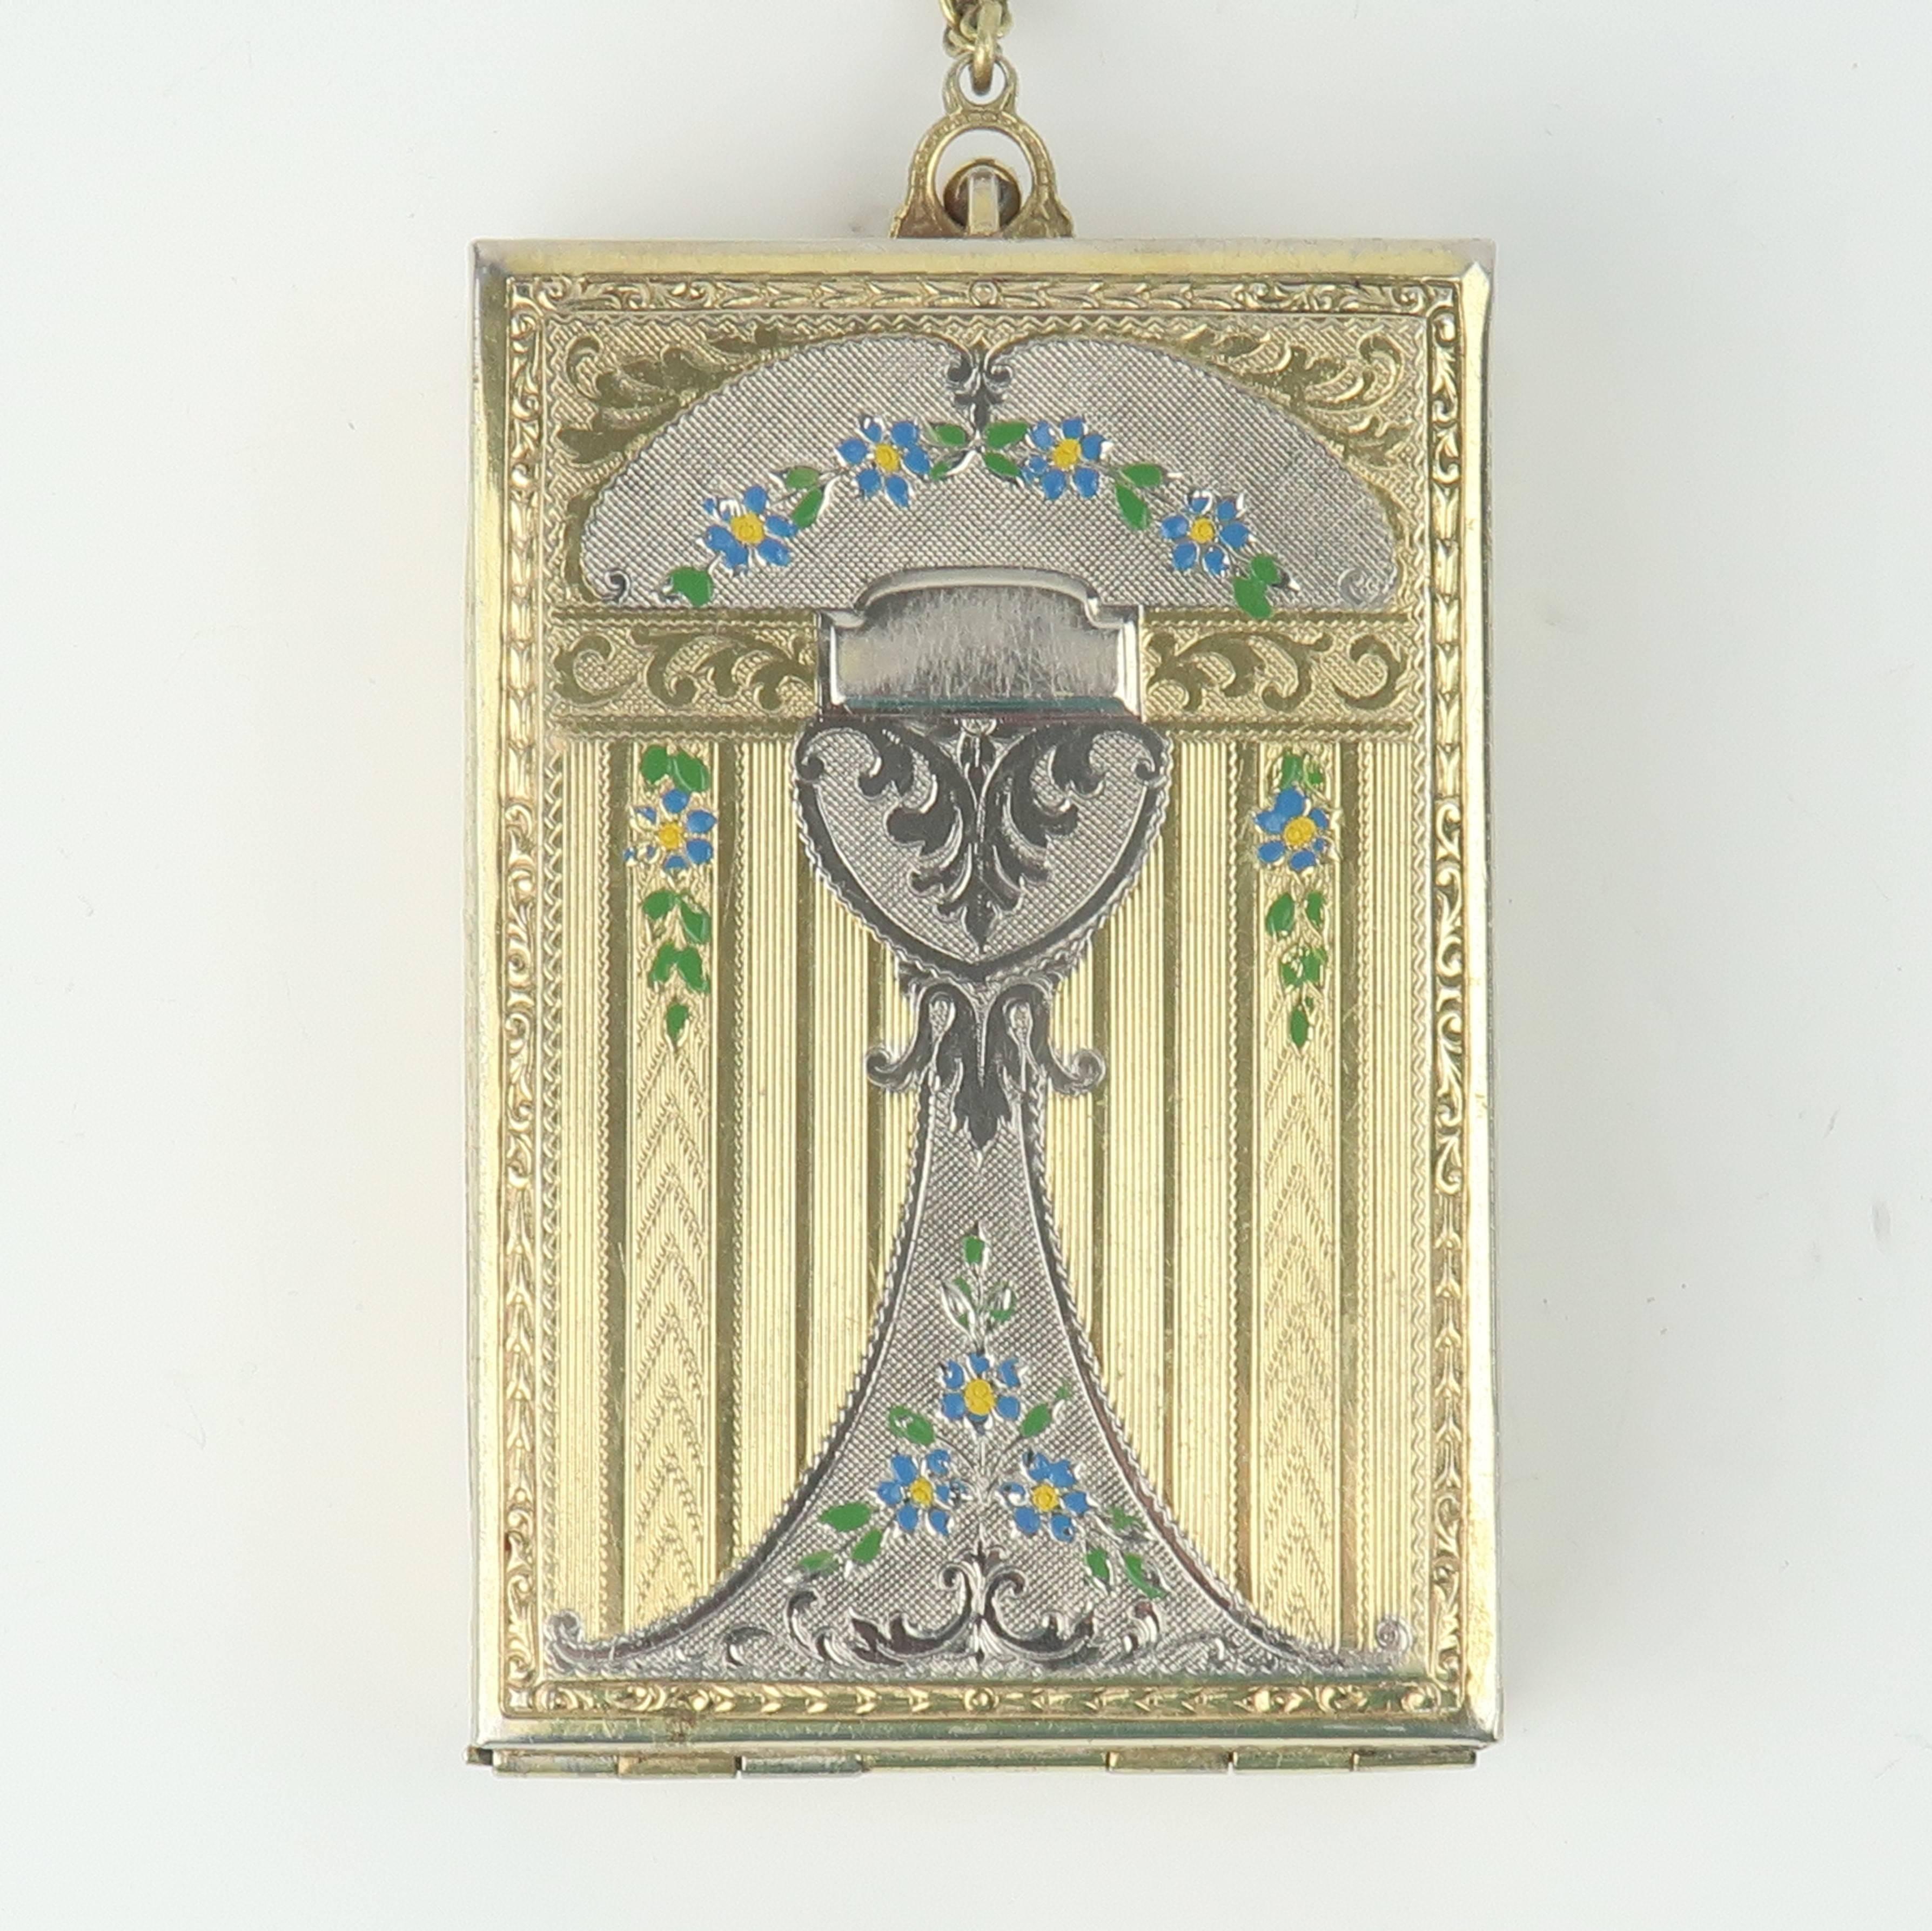 Much like chantelaines, elaborate mirrored compacts are feminine gadgets of a bygone era ... and oh so fun to explore!  This beautiful art nouveau example is a combination of gold and silver tone metals with guilloche decoration on the exterior and